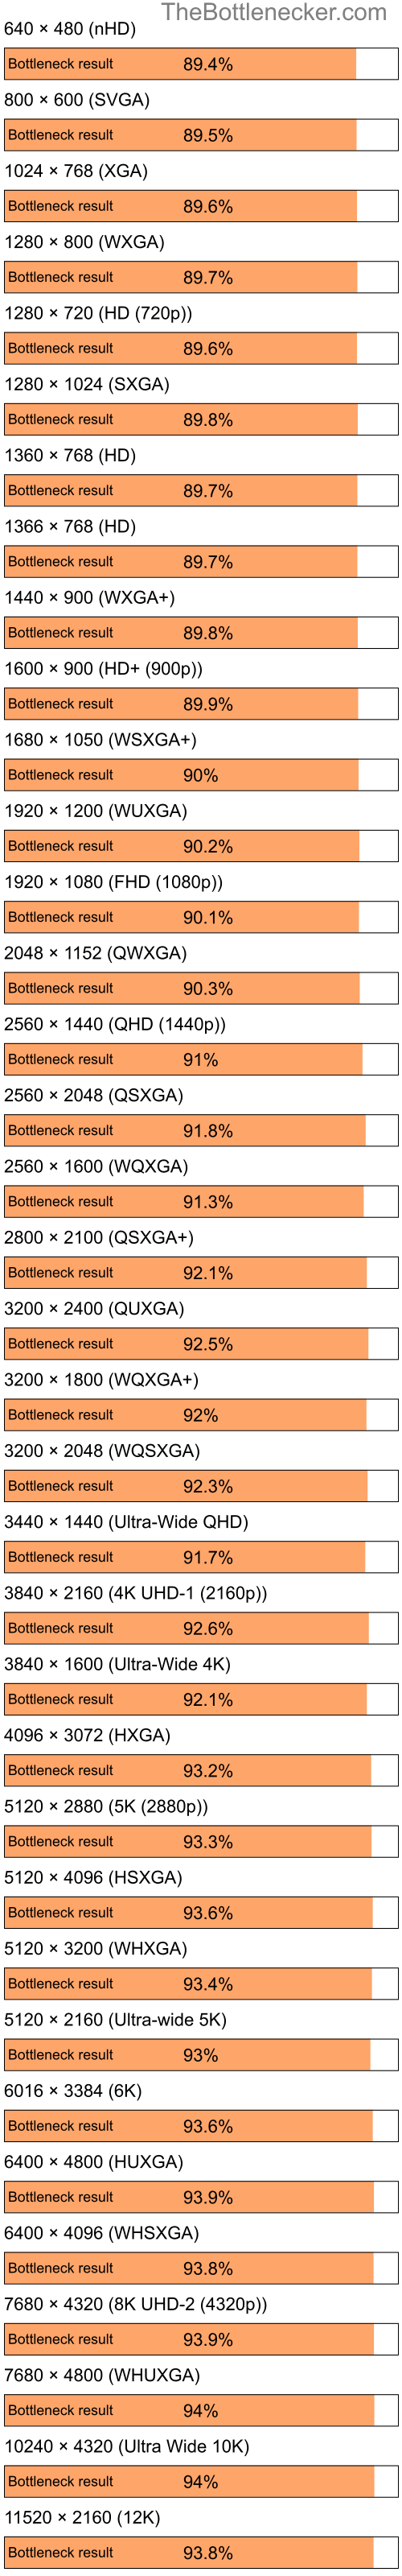 Bottleneck results by resolution for Intel Pentium 4 and AMD Mobility Radeon 9000 in General Tasks